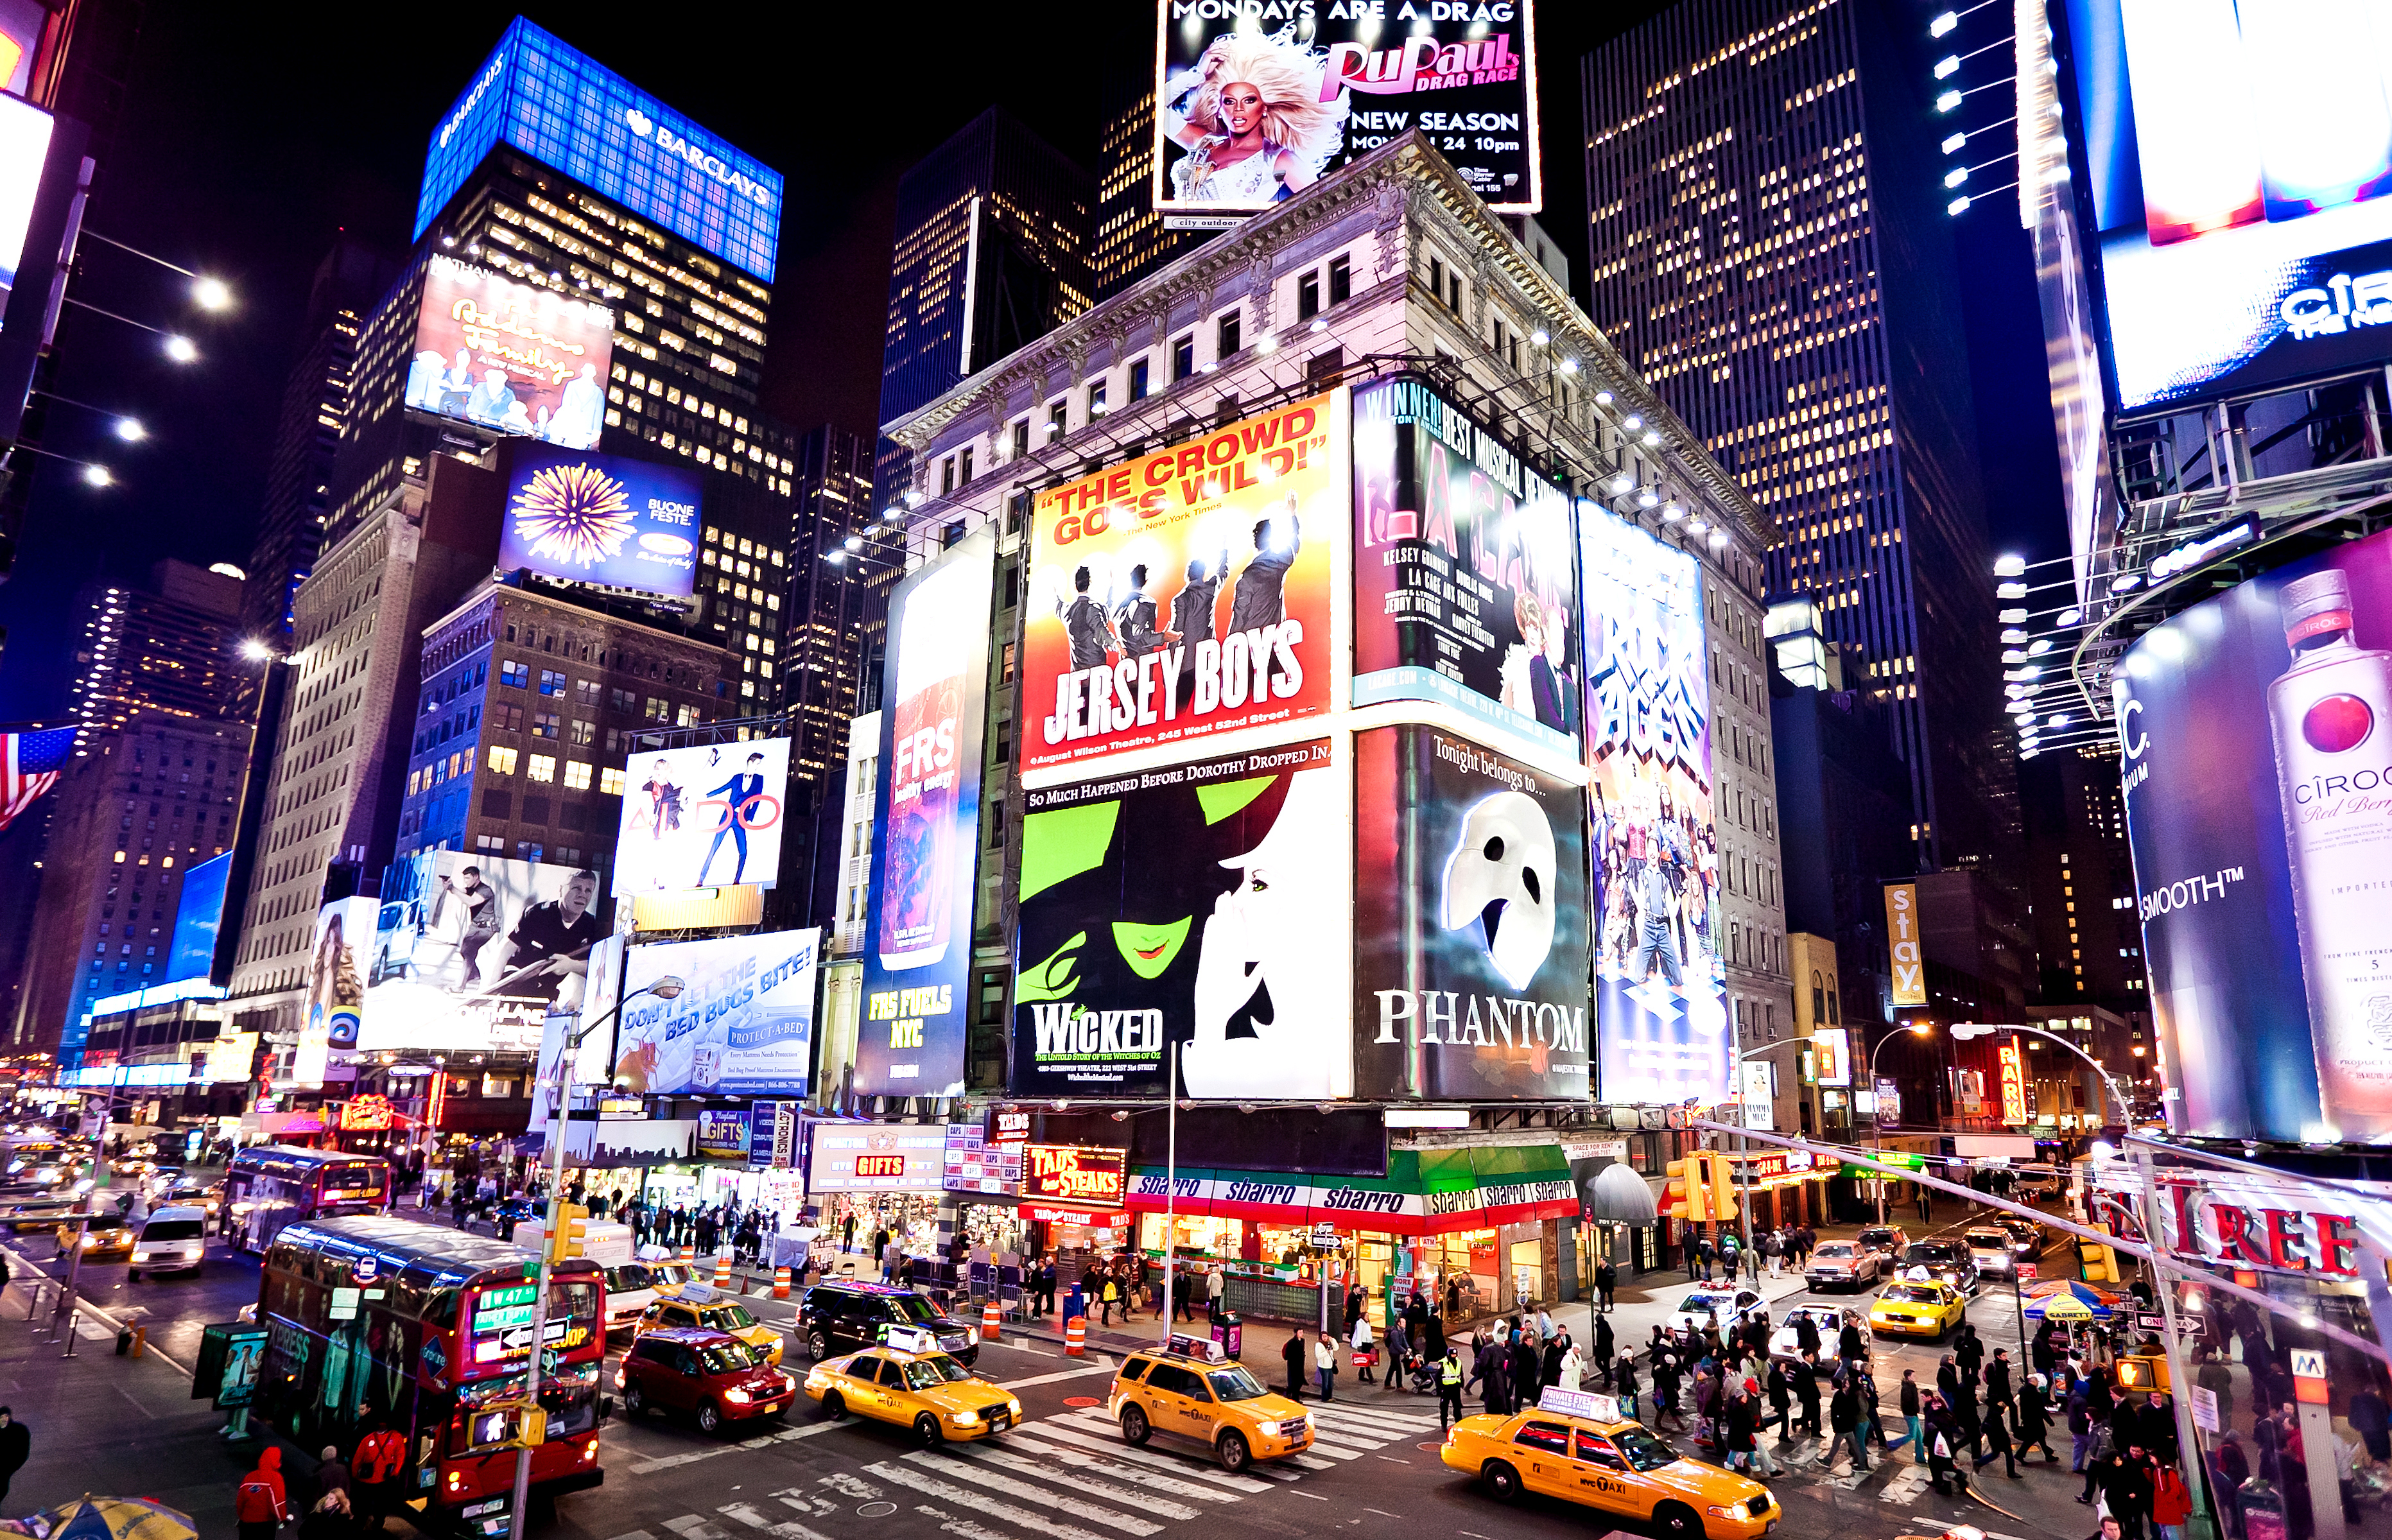 Illuminated Broadway theatres on Times Square